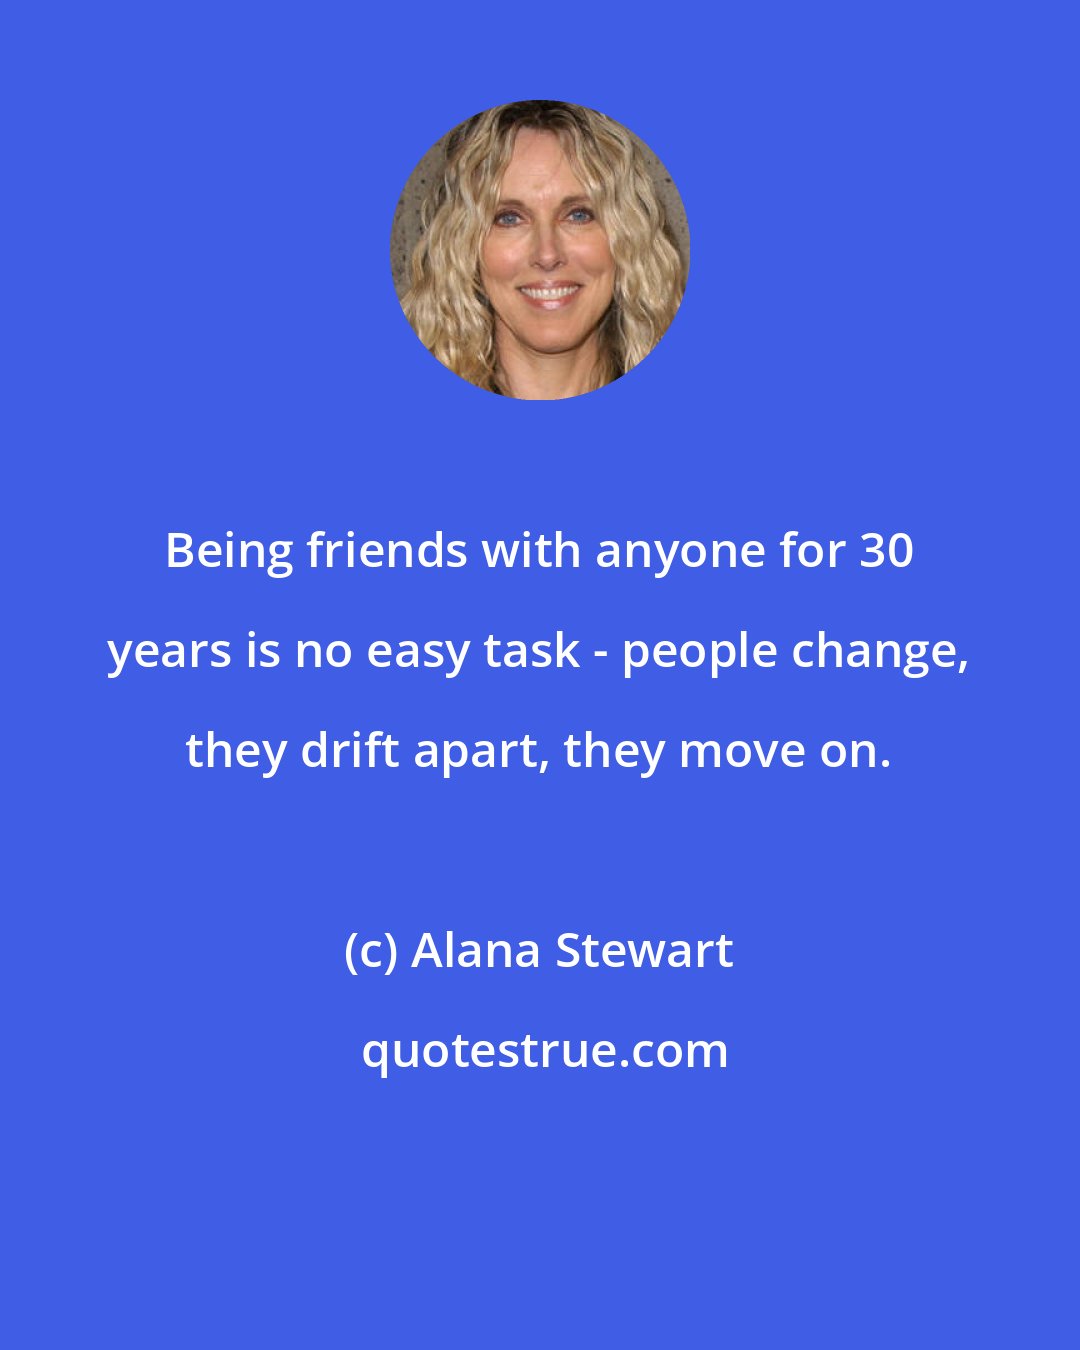 Alana Stewart: Being friends with anyone for 30 years is no easy task - people change, they drift apart, they move on.